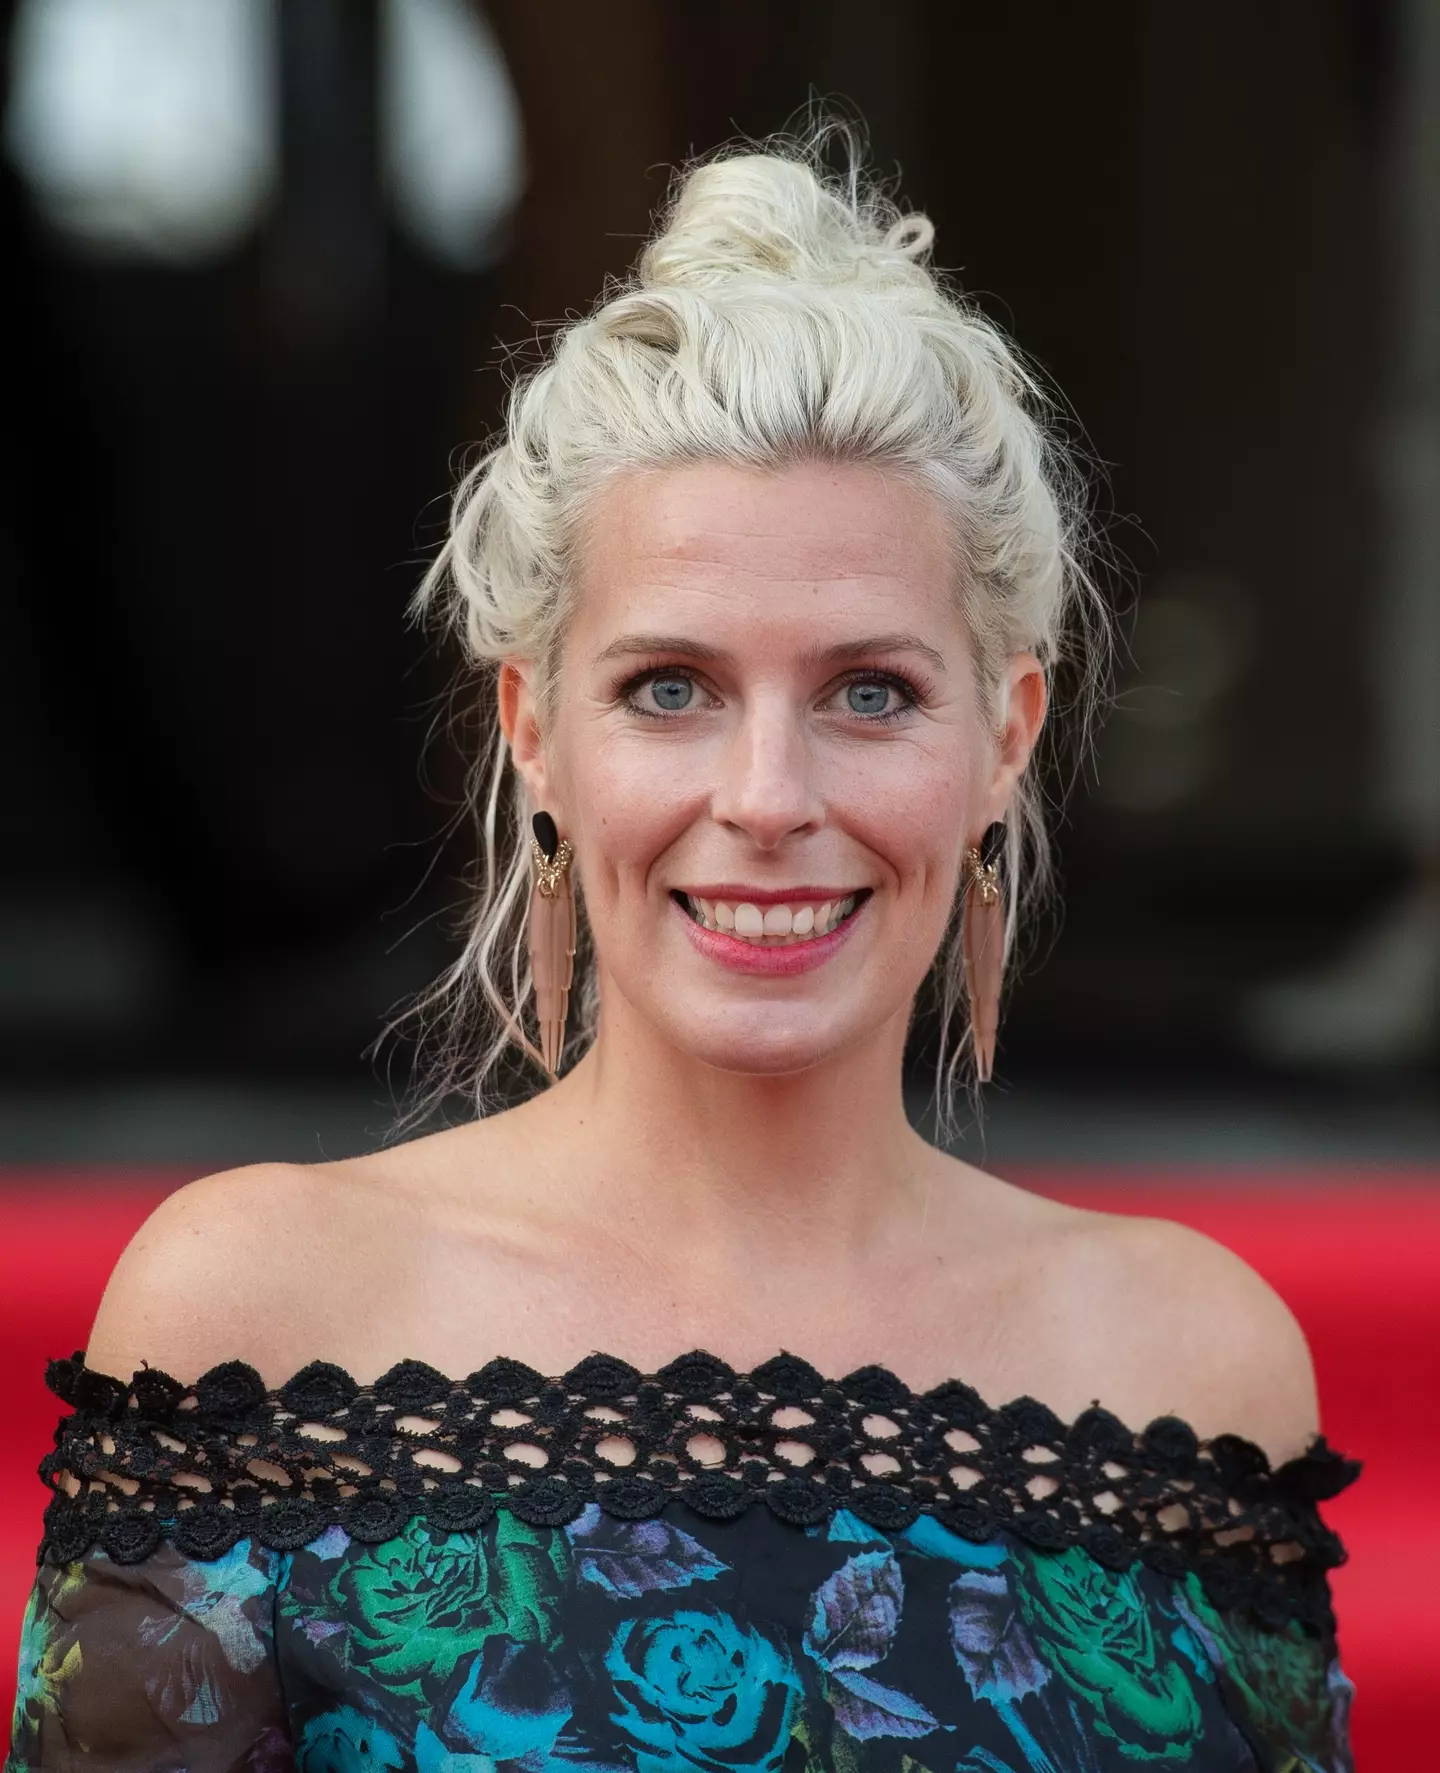 Sara Pascoe says there are unnamed predators in the comedy industry.